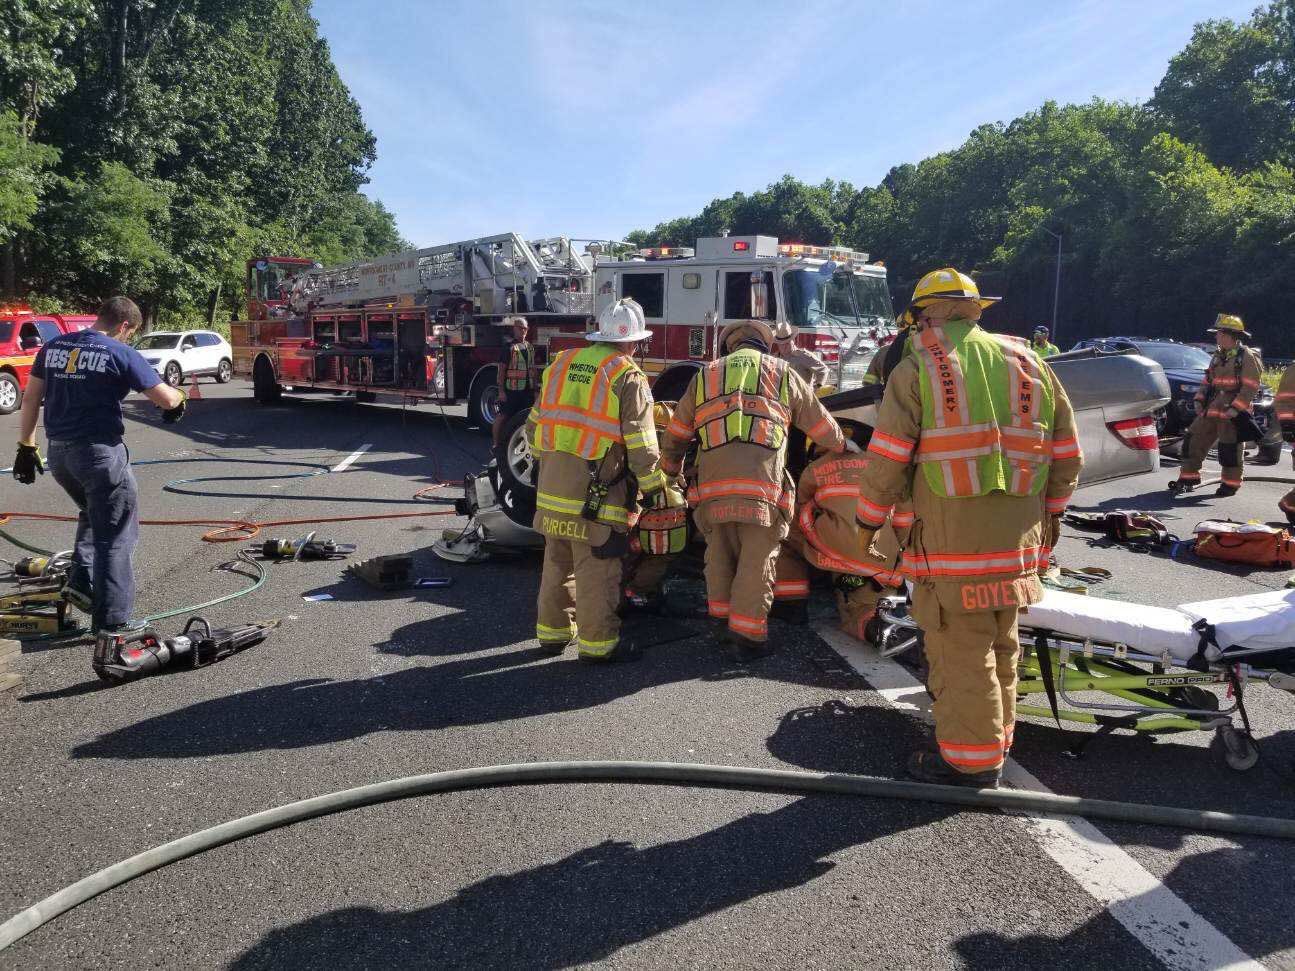 An injured person had to be rescued from a vehicle overturned on the Capital Beltway in Bethesda. (Courtesy Pete Piringer)